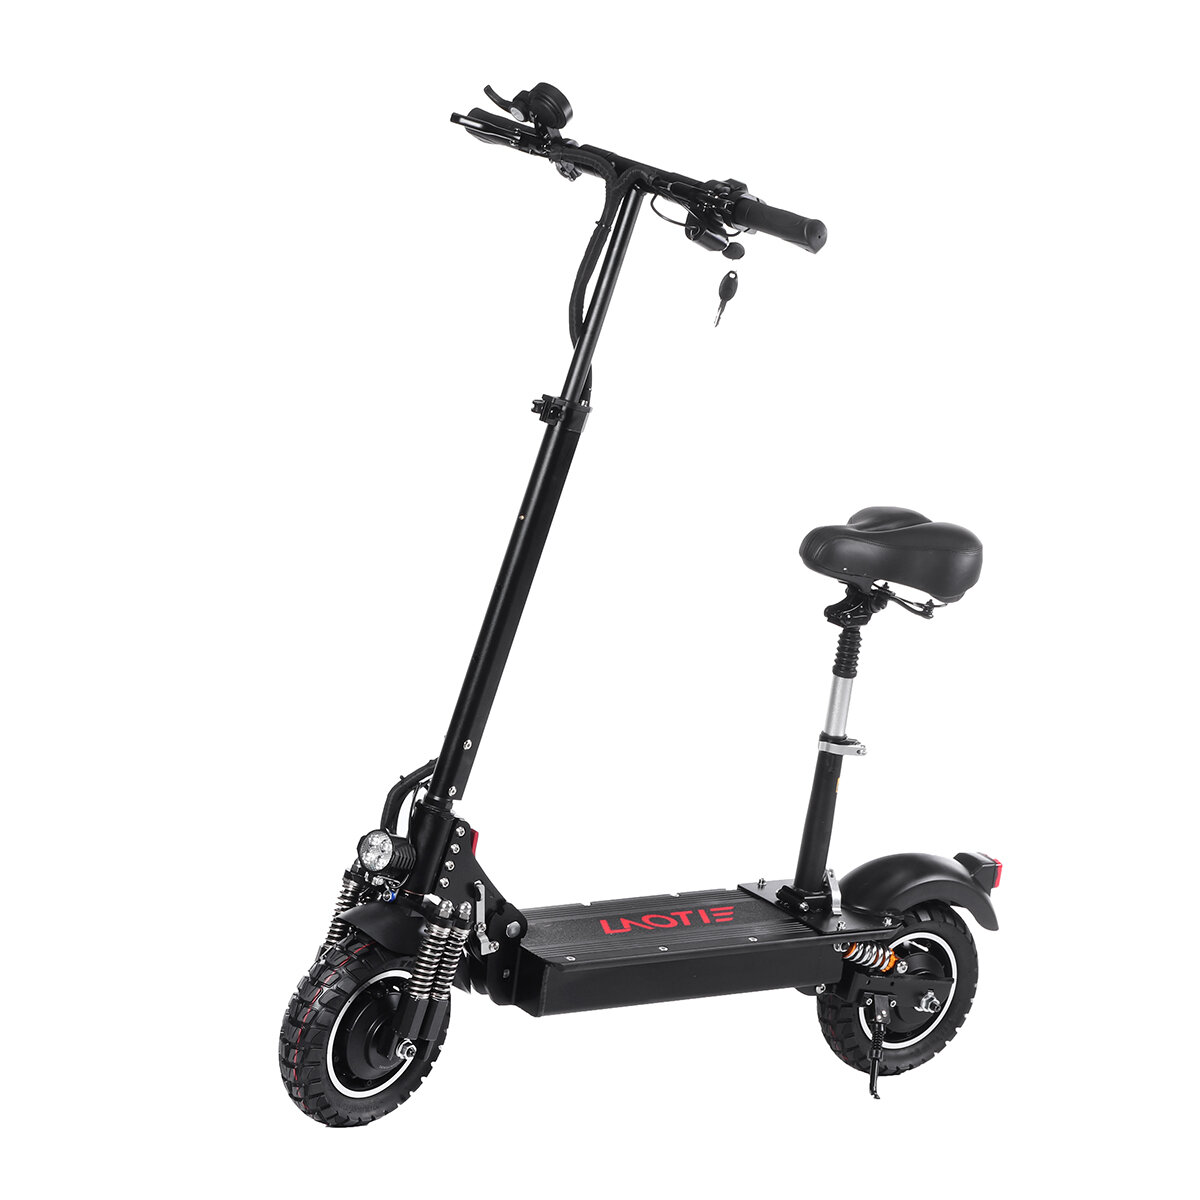 LAOTIE® ES10P 2000W Dual Motor 28.8Ah 21700 Battery 52V 10 Inches Folding Electric Scooter with Seat 70km/h Top Speed 100km Mileage Max Load 120kg